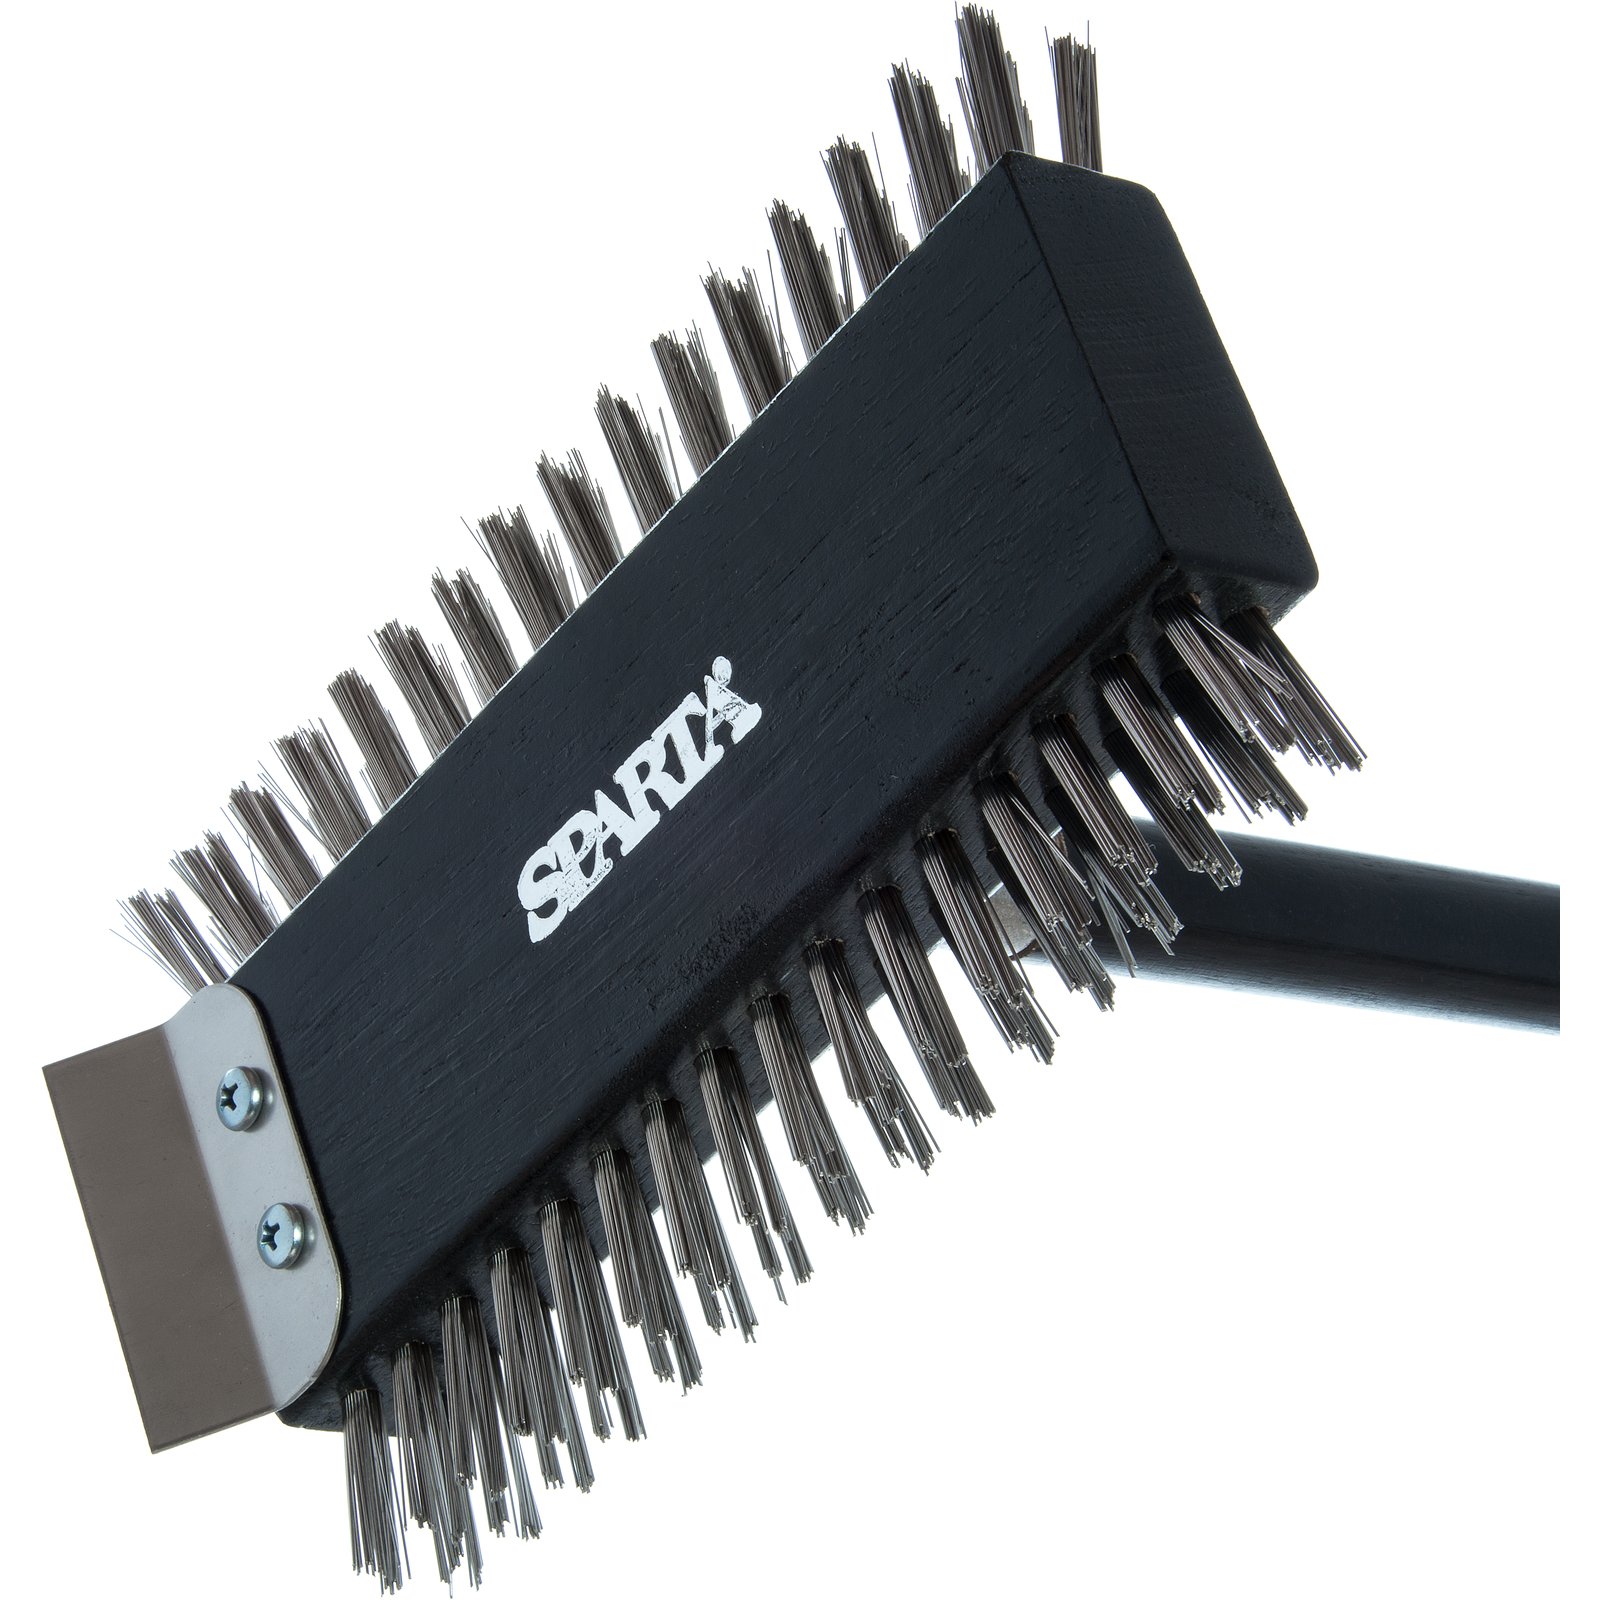 Thunder Group 20 Narrow Broiler / Grill Cleaning Brush